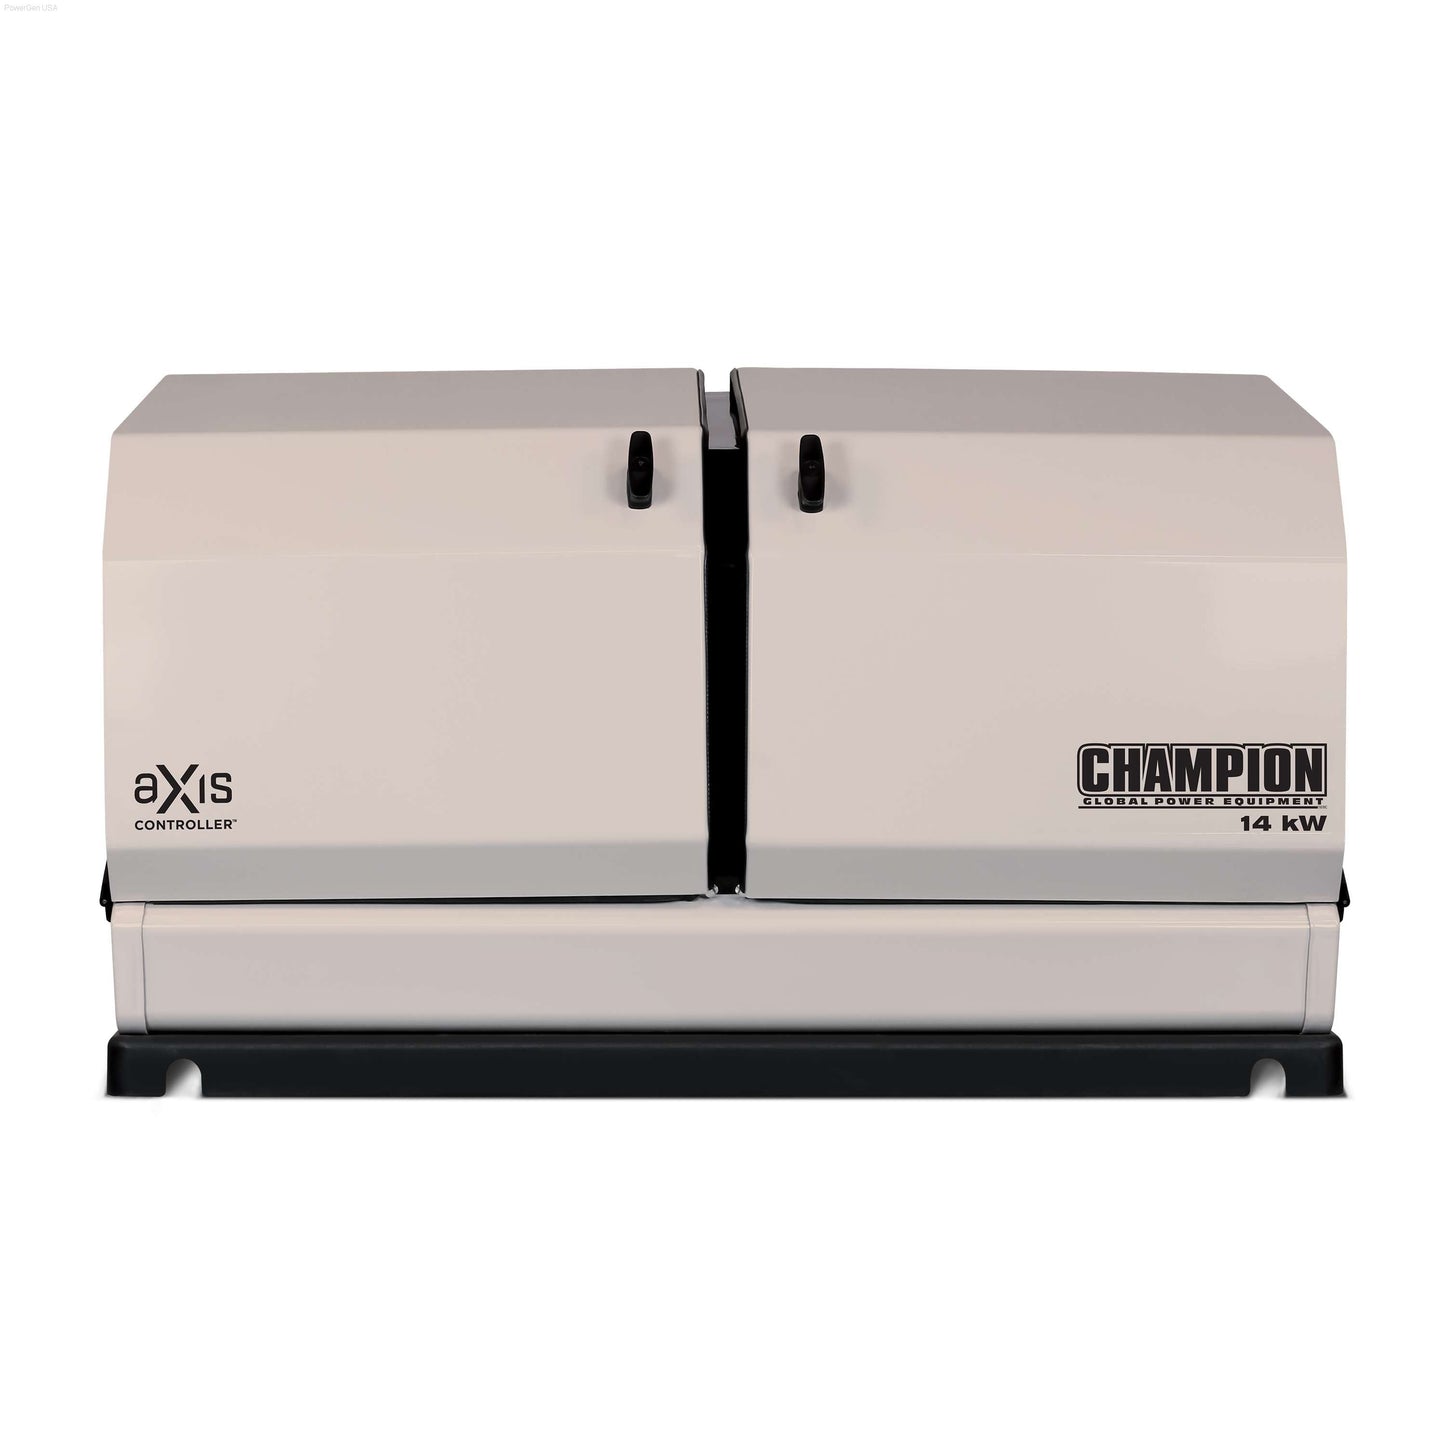 Dual Fuel Hybrid - Champion 14kW AXis Home Standby Generator System With 200-Amp AXis Automatic Transfer Switch